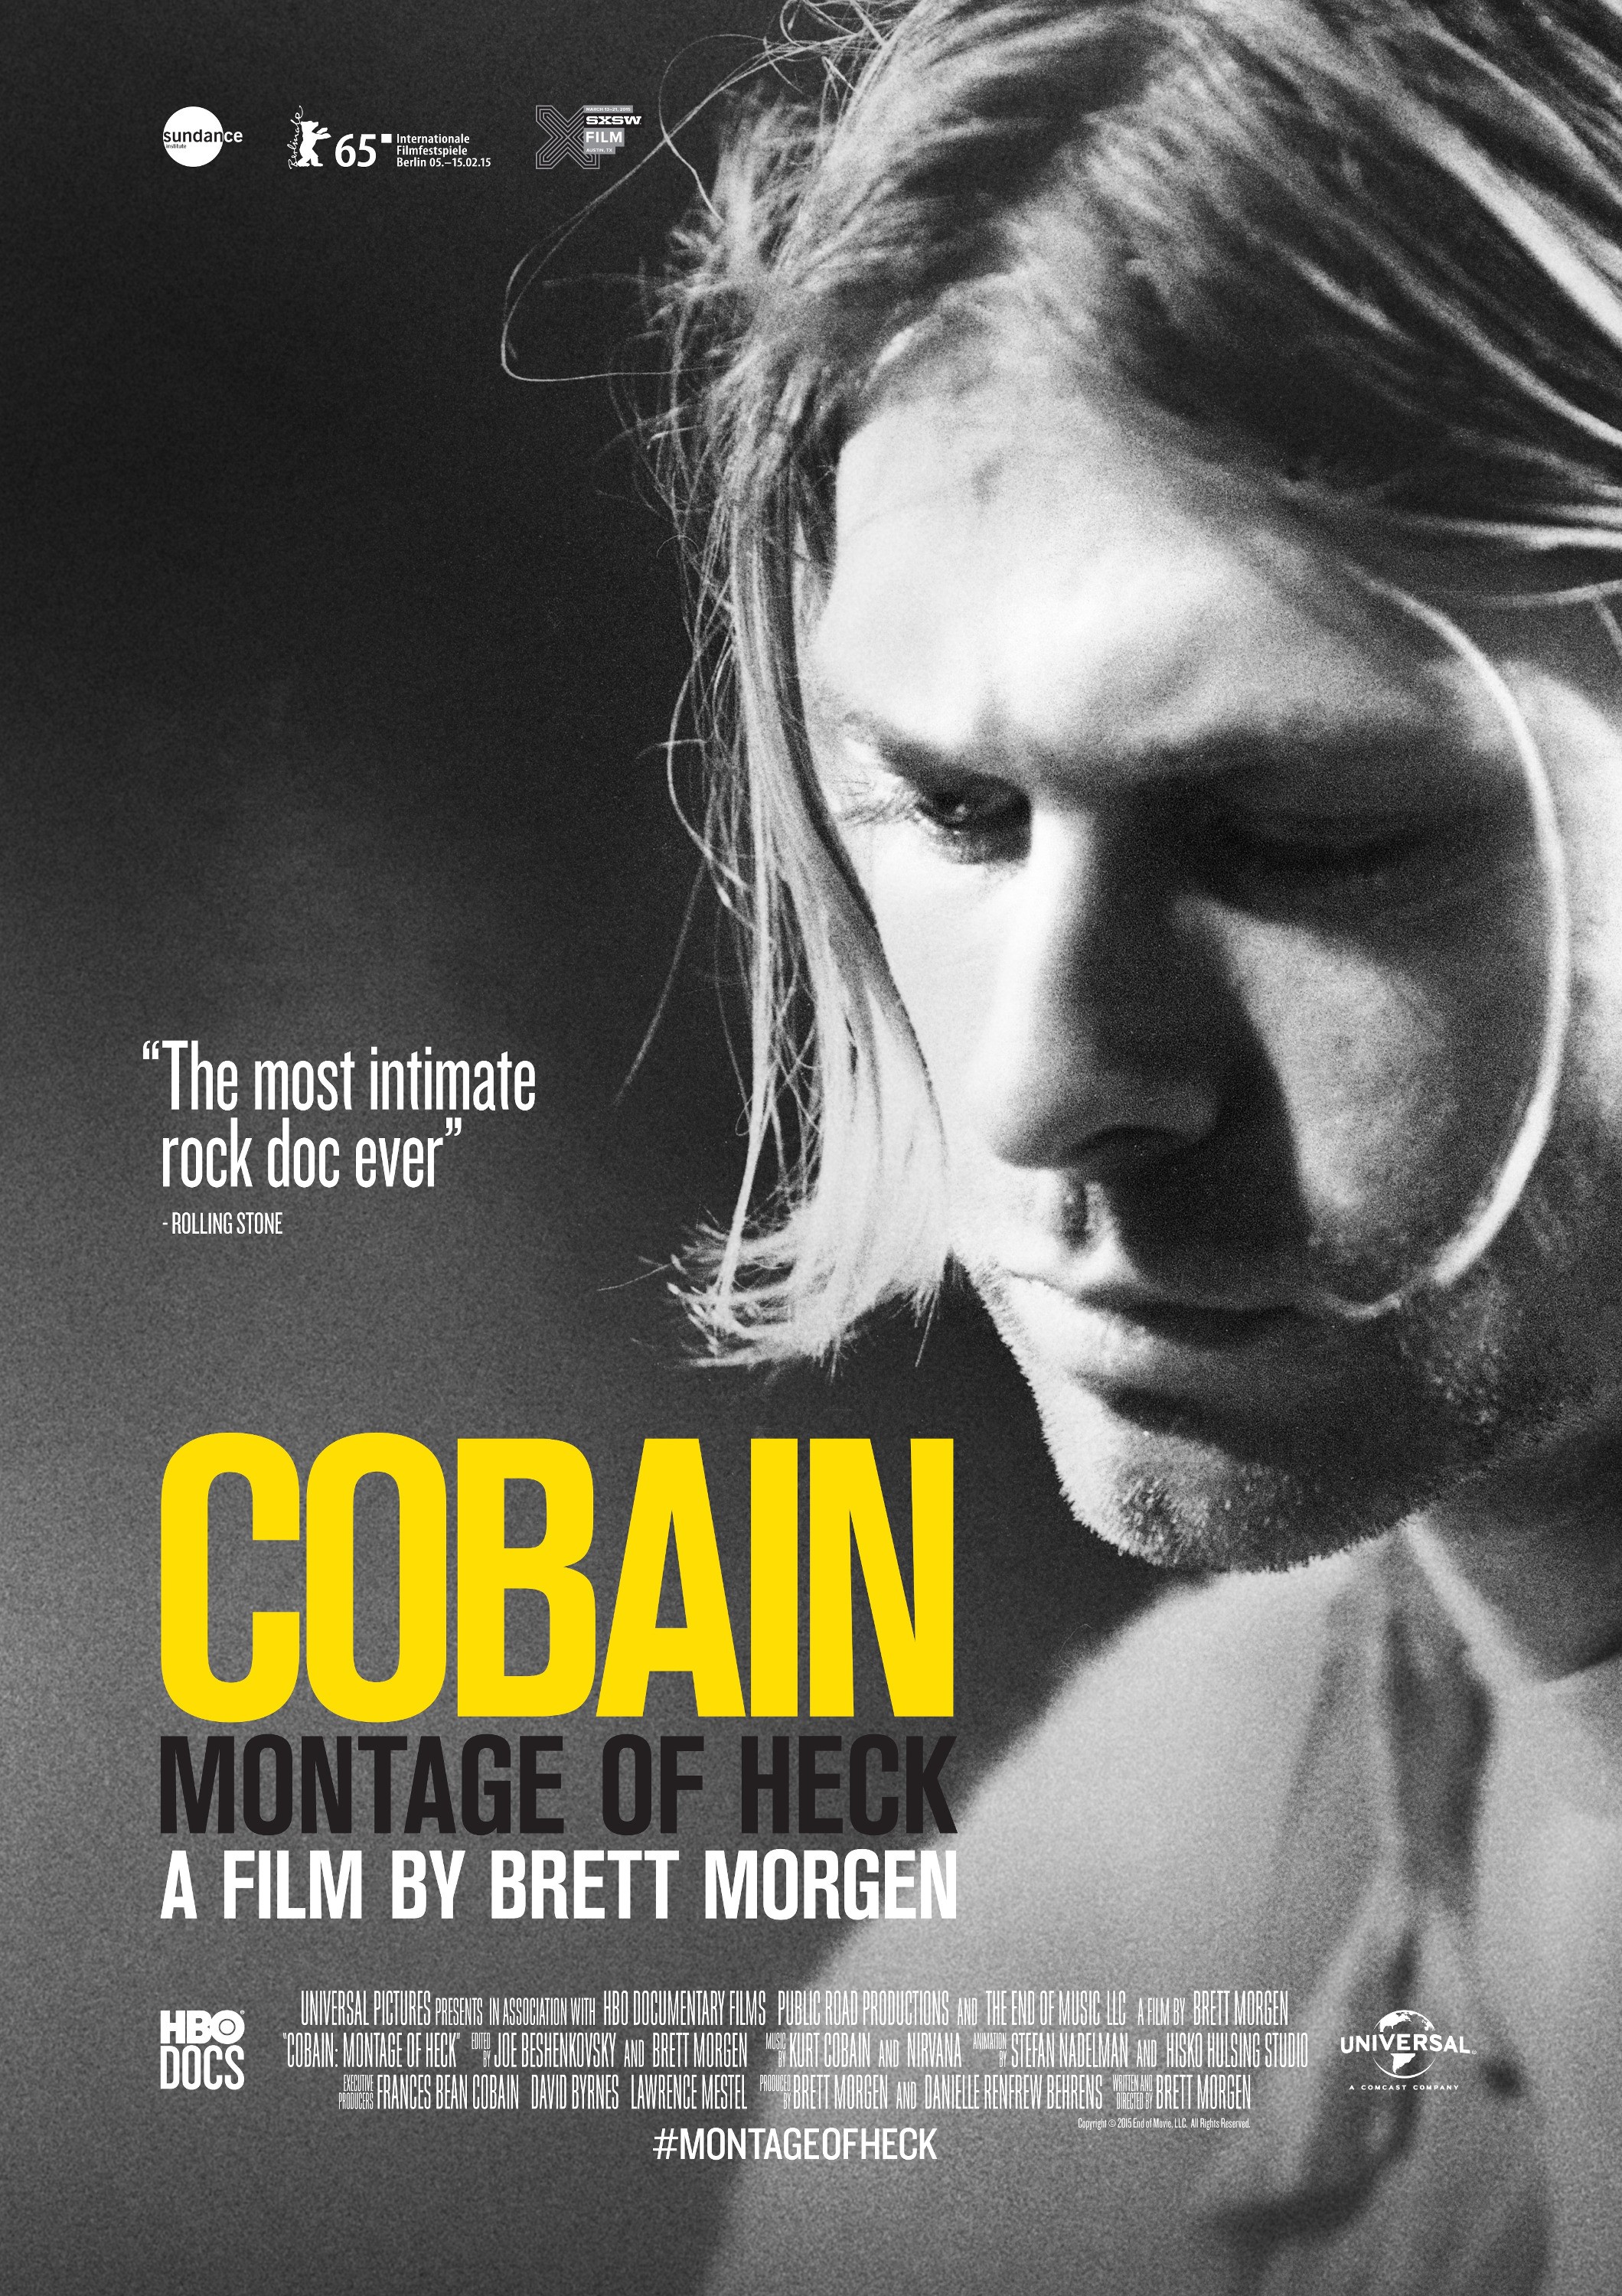 Mega Sized Movie Poster Image for Kurt Cobain: Montage of Heck (#1 of 3)